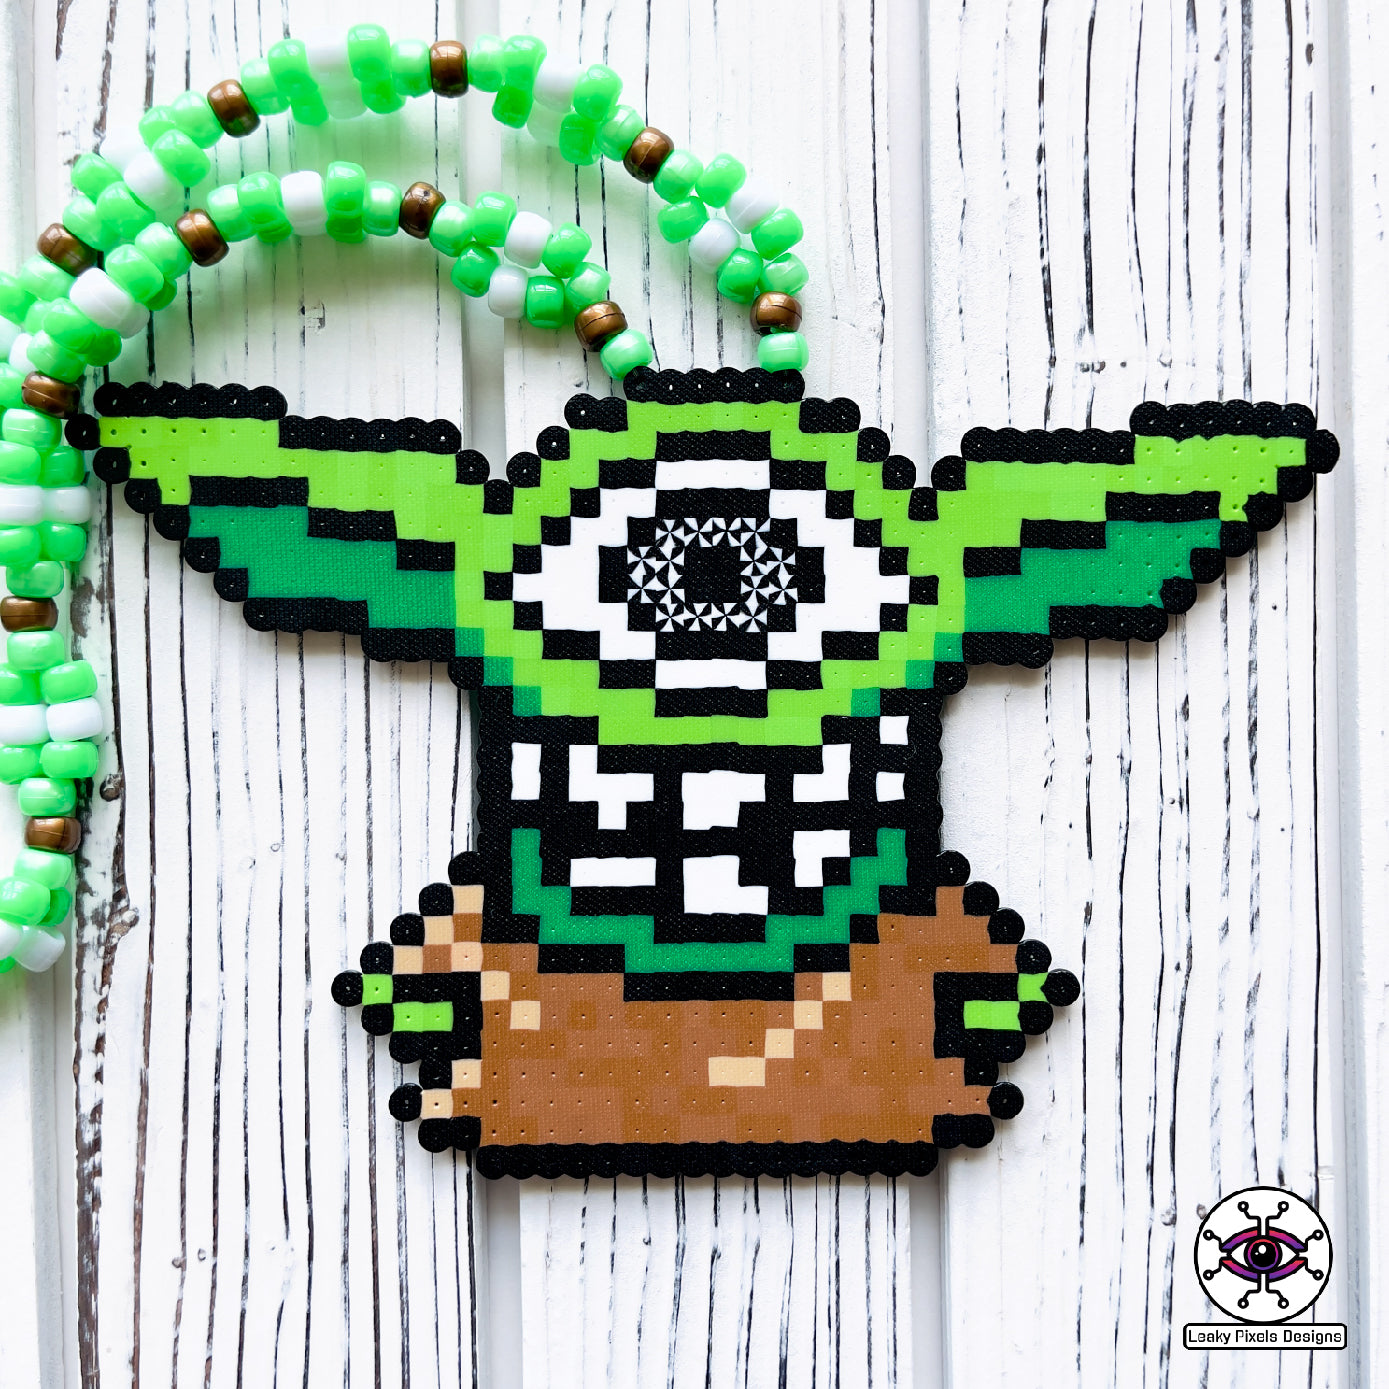 Baby grogu subtronics perler necklace. green yoda with cyclops eye and chaotic teeth. necklace is made with brown, white and green perler beads. He is wearing a brown outfit.